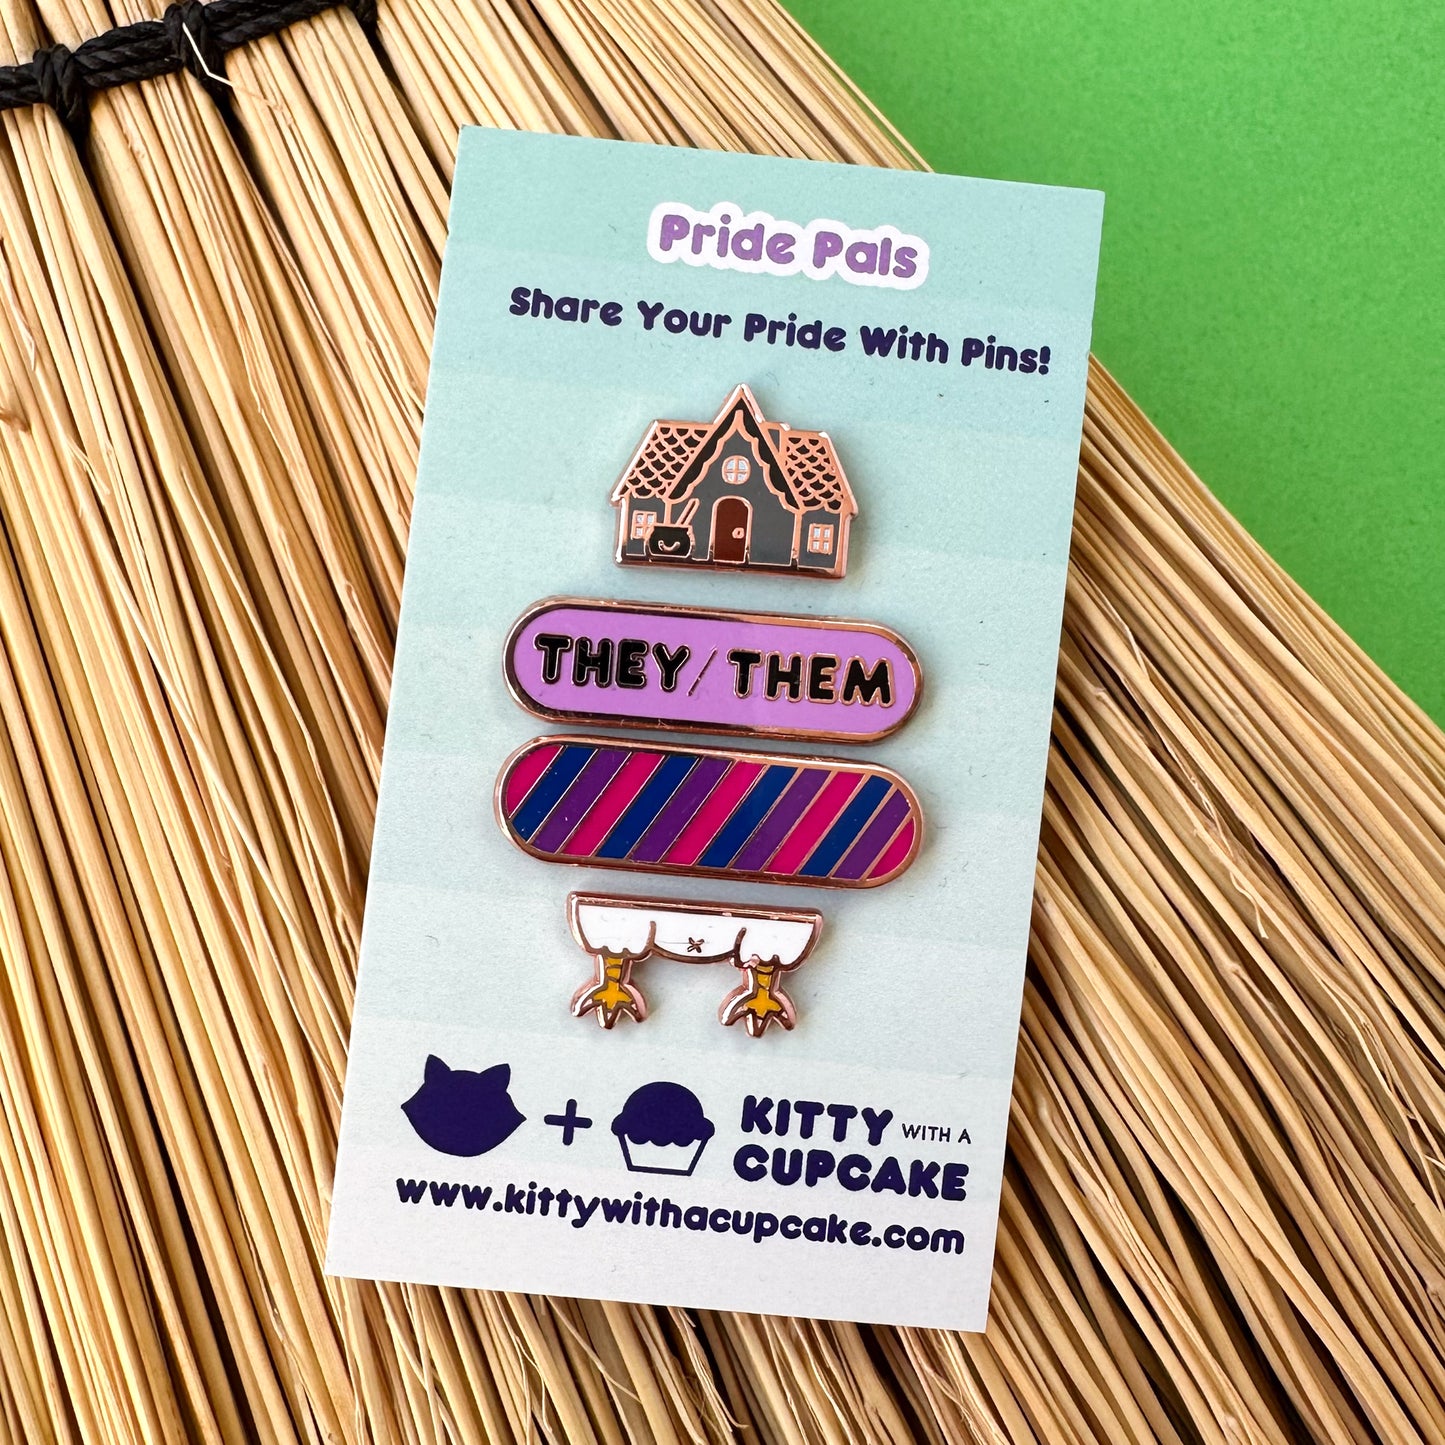 A card that reads "Pride Pals" with four pins on it in a stack, there is a grey house with a cauldron, a purple bandaid shaped pin with the words "They/Them" on it and a bandaid shaped pin in the colors of the bi pride flag, and the bottom pin is chicken legs. The card is on top of broom straw on a green background.